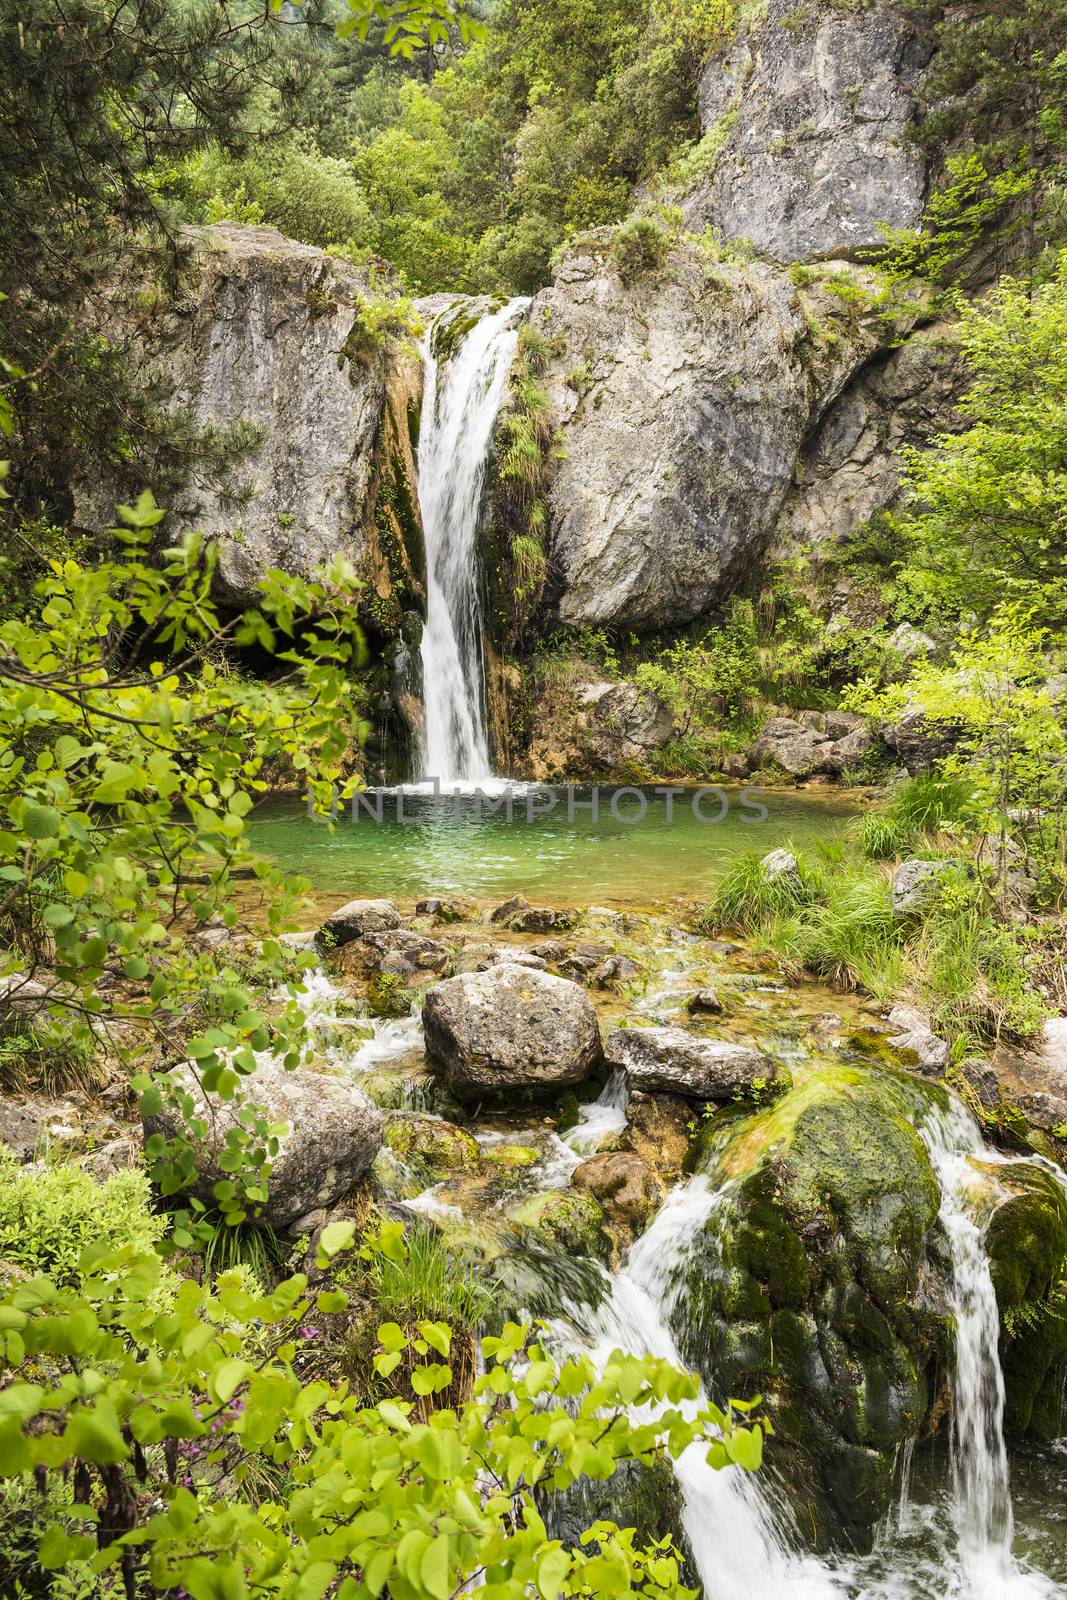 Ourlia waterfalls at Olympus mountain, Greece by ankarb